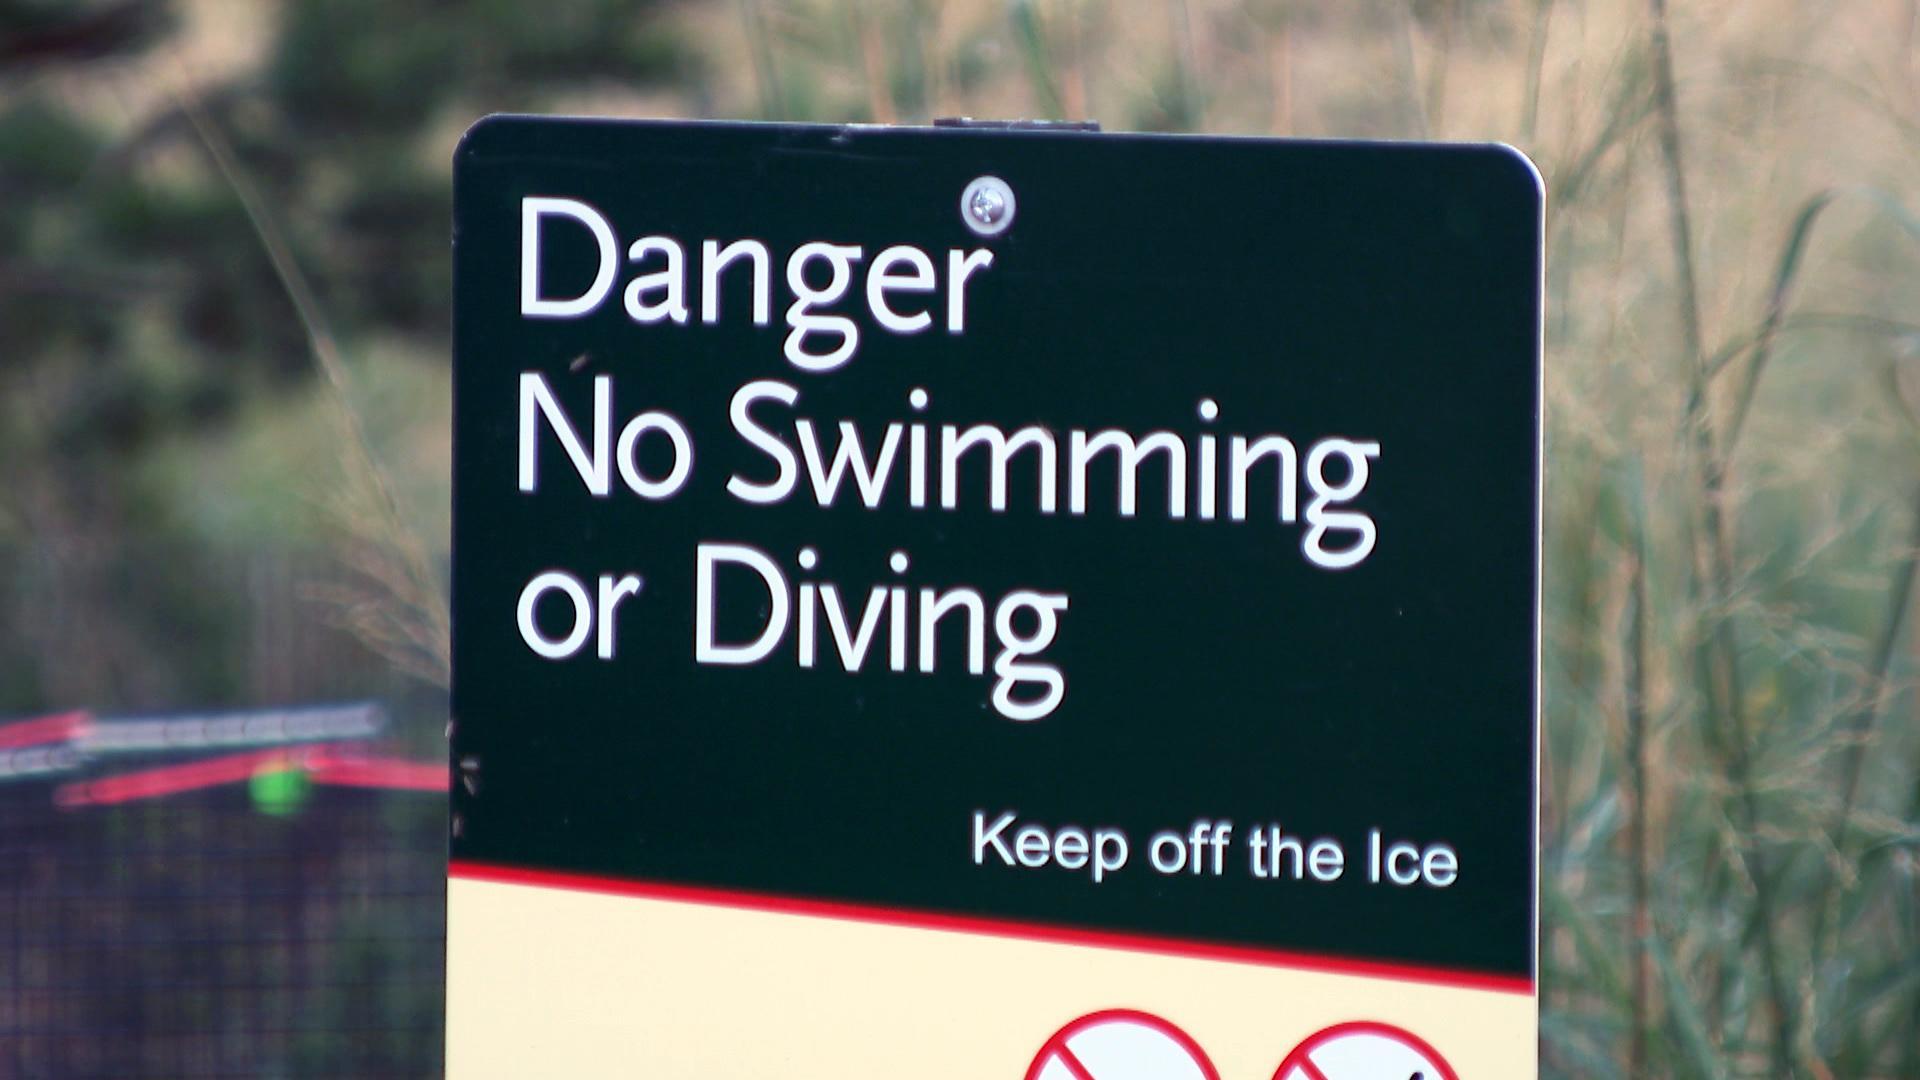 Are safety signs enough? Some activists are calling for life rings along the lakefront. (WTTW News)